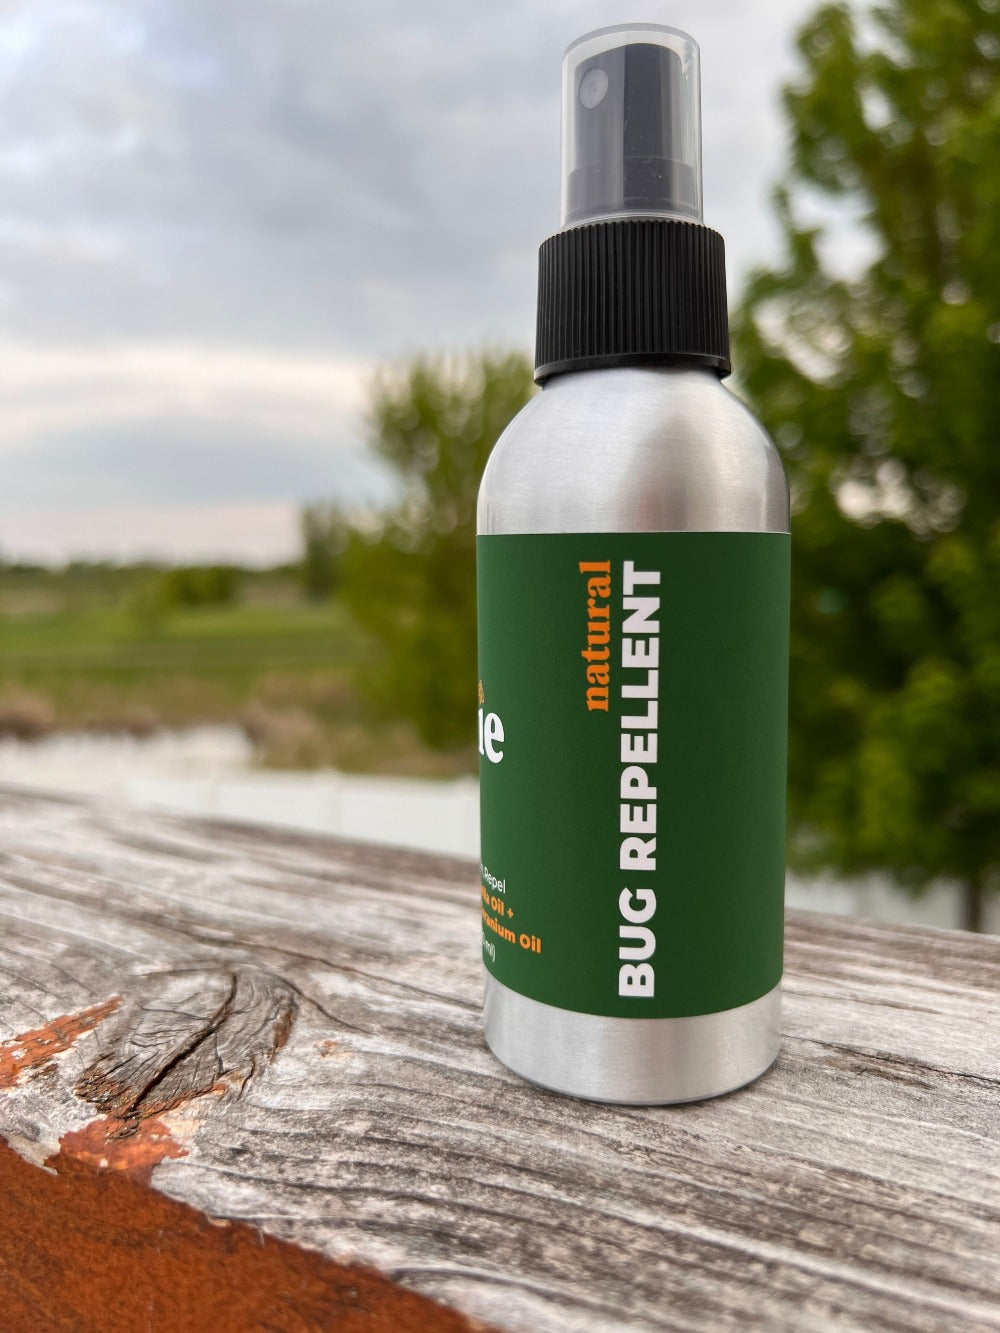 DEET-FREE bug repellent formulated with nourishing, non-toxic ingredients